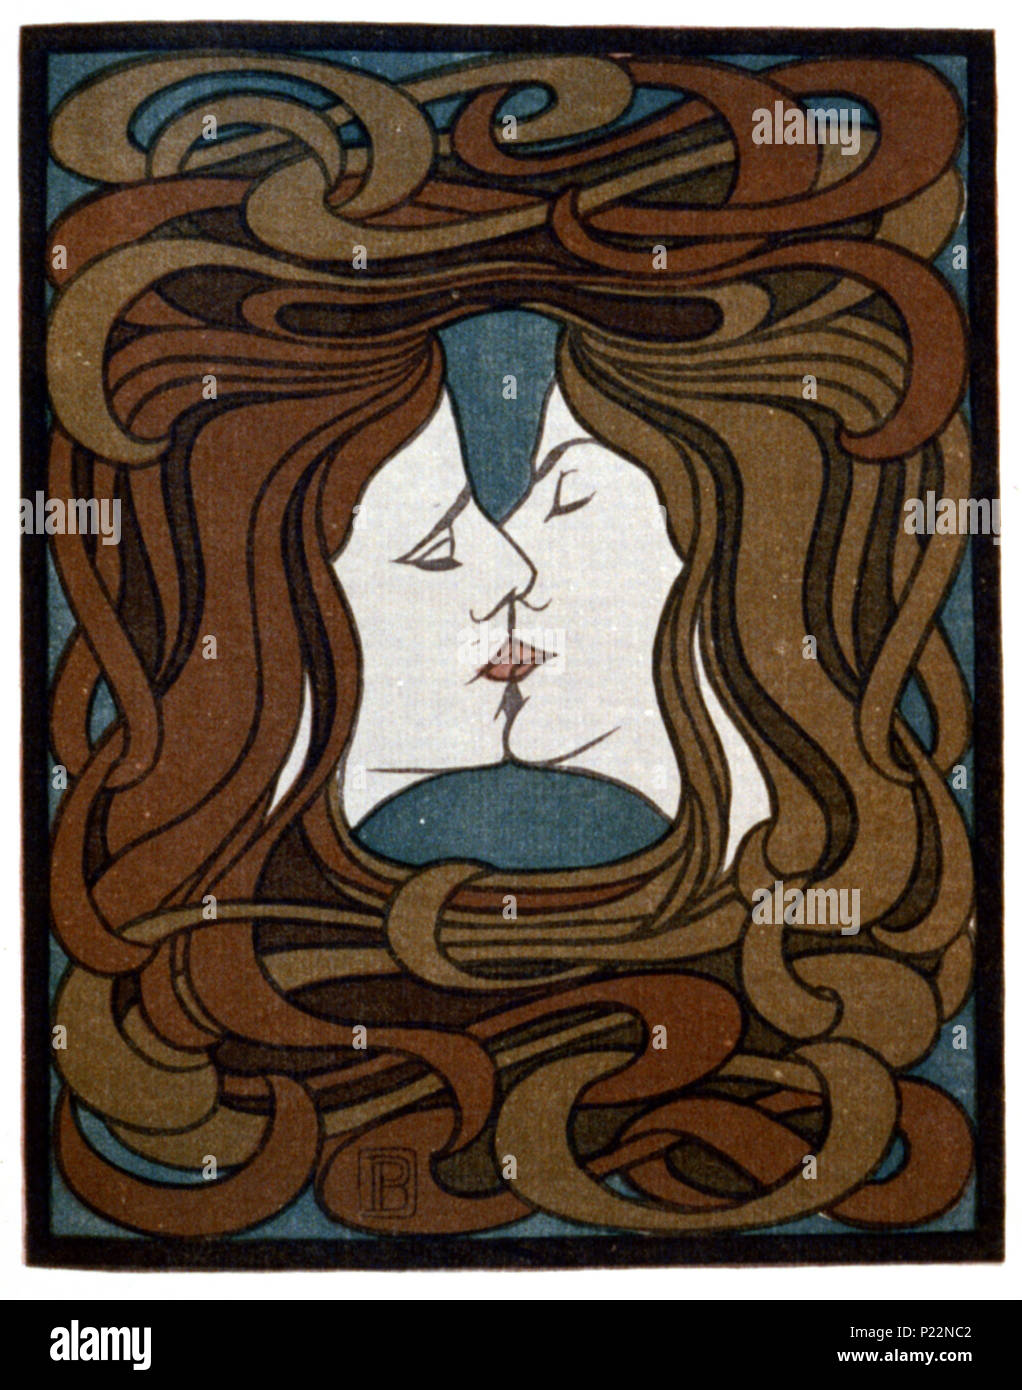 . English: Two faces kissing with entwined art-nouveau style hair. Illustration in: Pan. Berlin : F. Fontane & Co., Oct. 1898, vol. 4, between pps. 116 and 117. 1 print : woodcut, color. circa 1898. Peter Behrens (1868–1940) 221 Peter Behrens - Two Faces Kissing cph.3b49745 Stock Photo